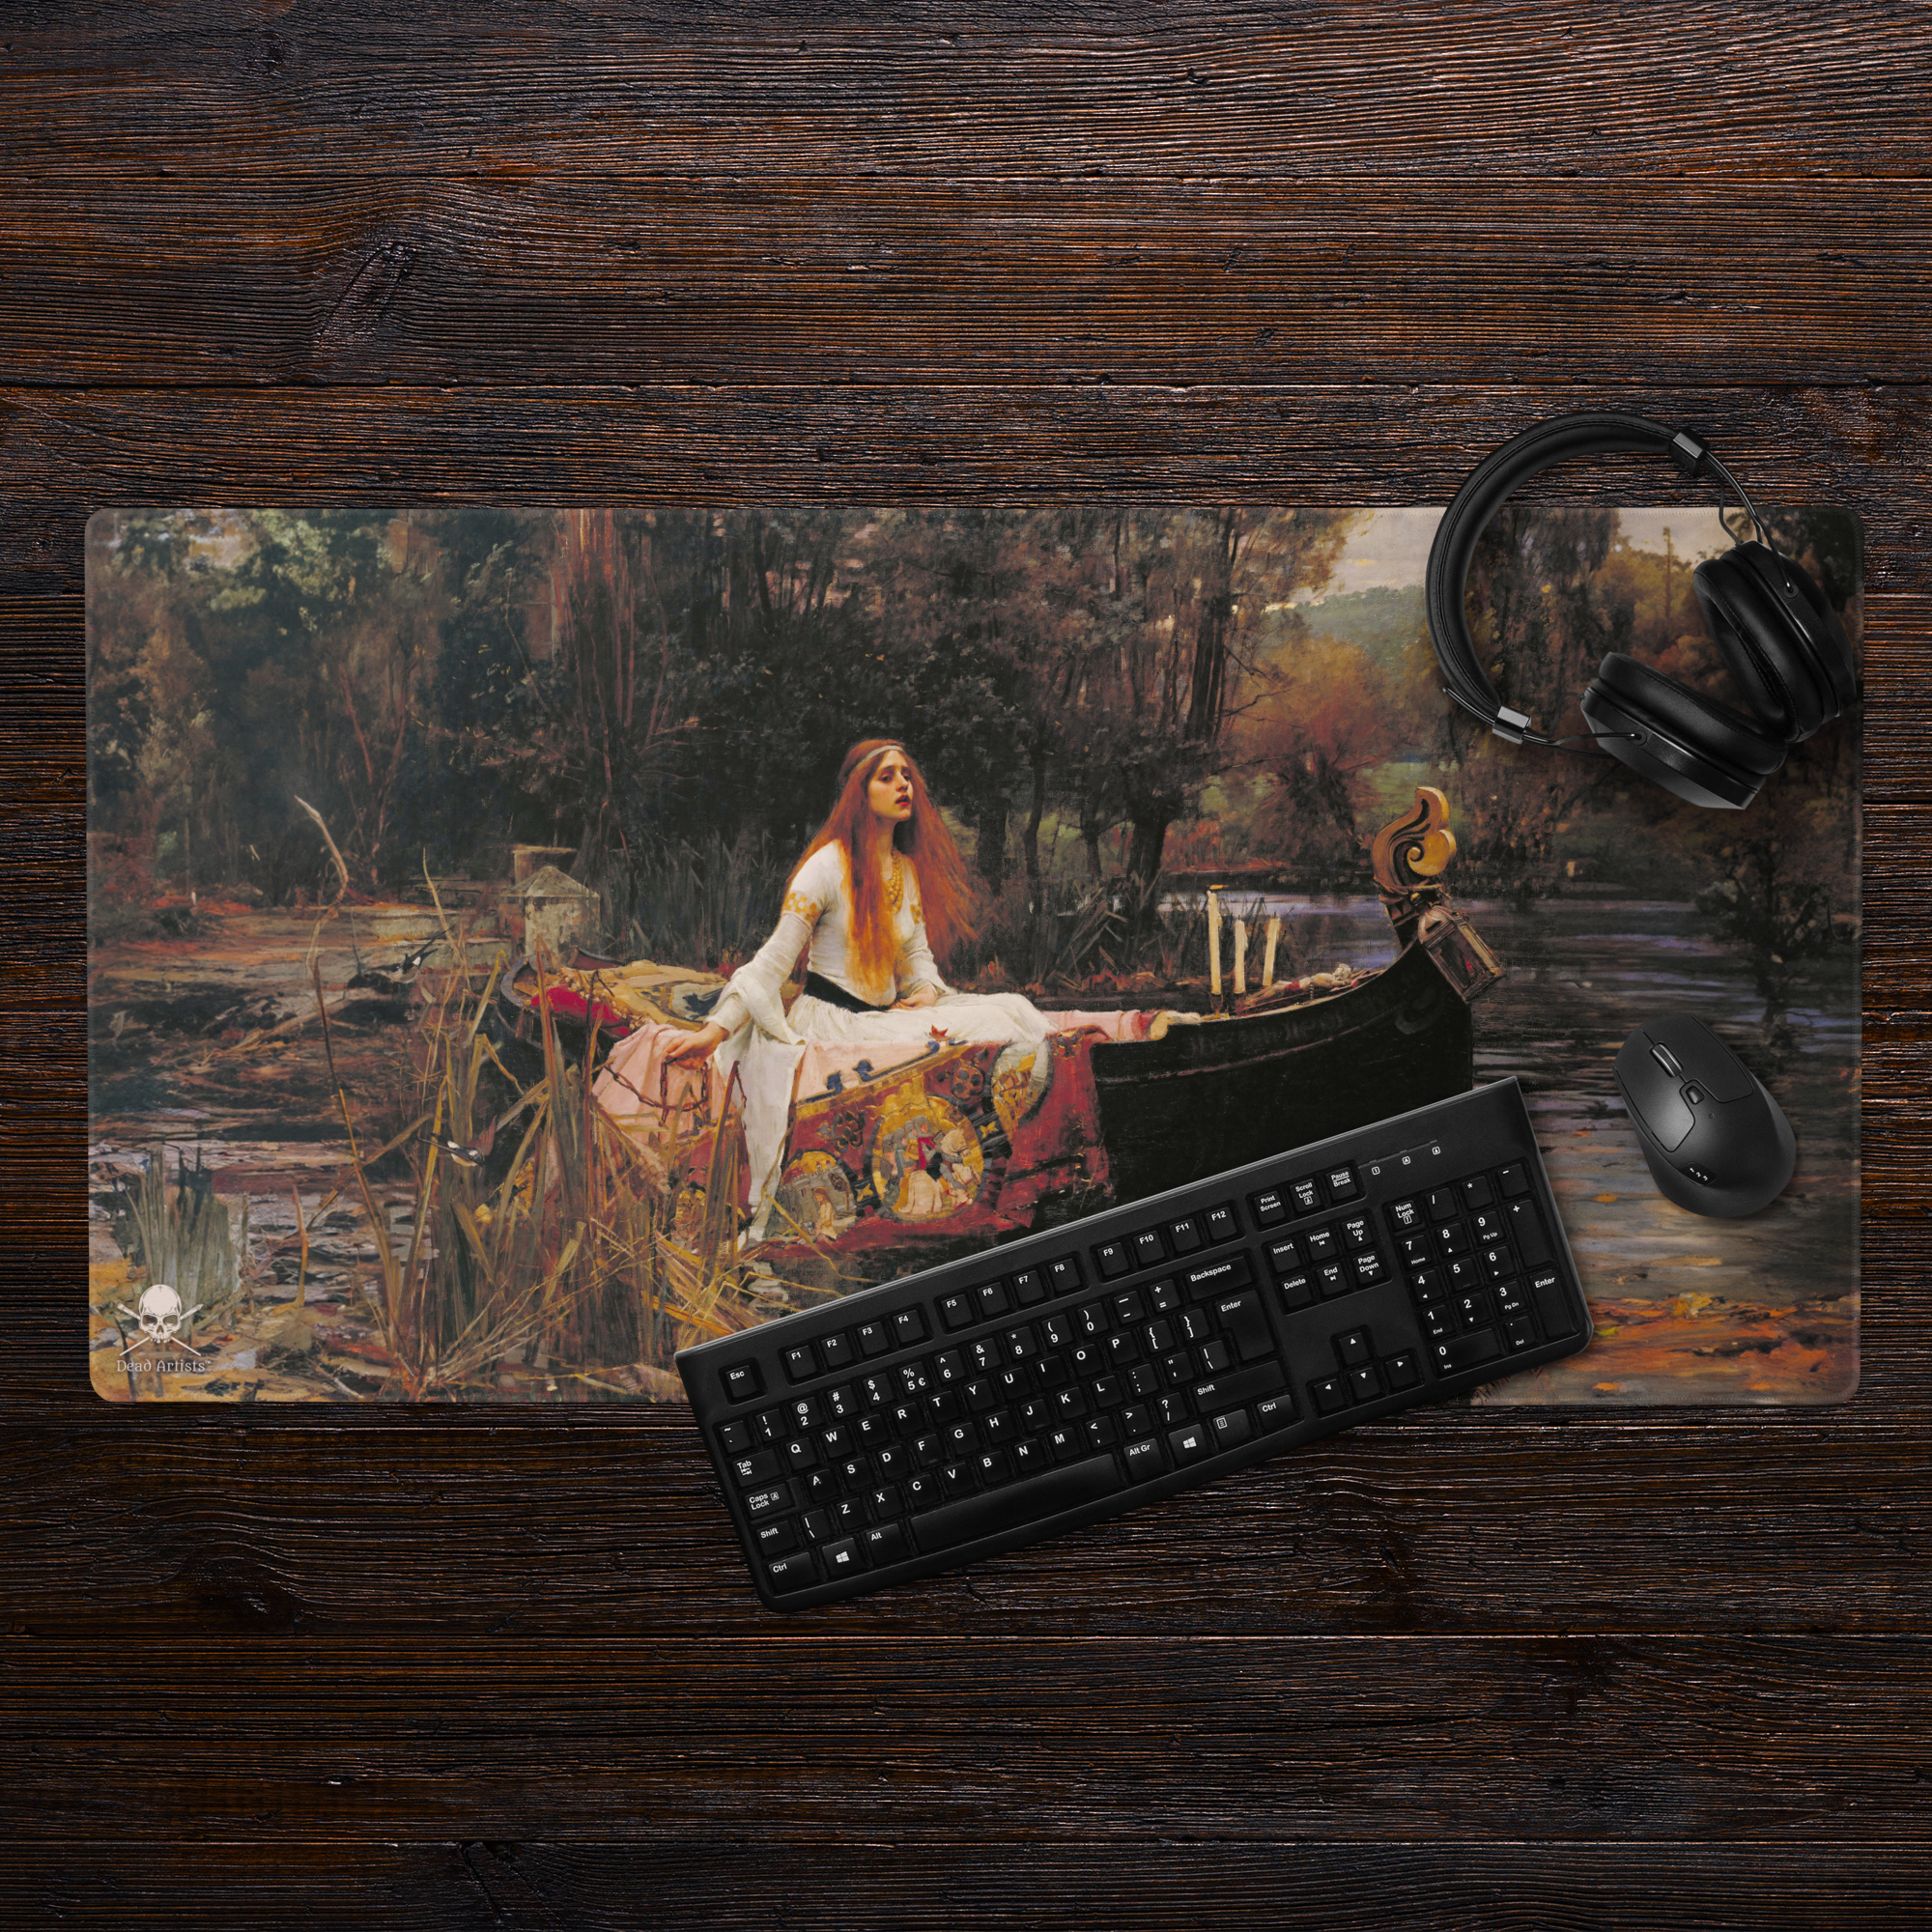 The Lady of Shalott by John William Waterhouse Desk Mat Mouse Pad, Dark Academia, Gothic Art, Macabre